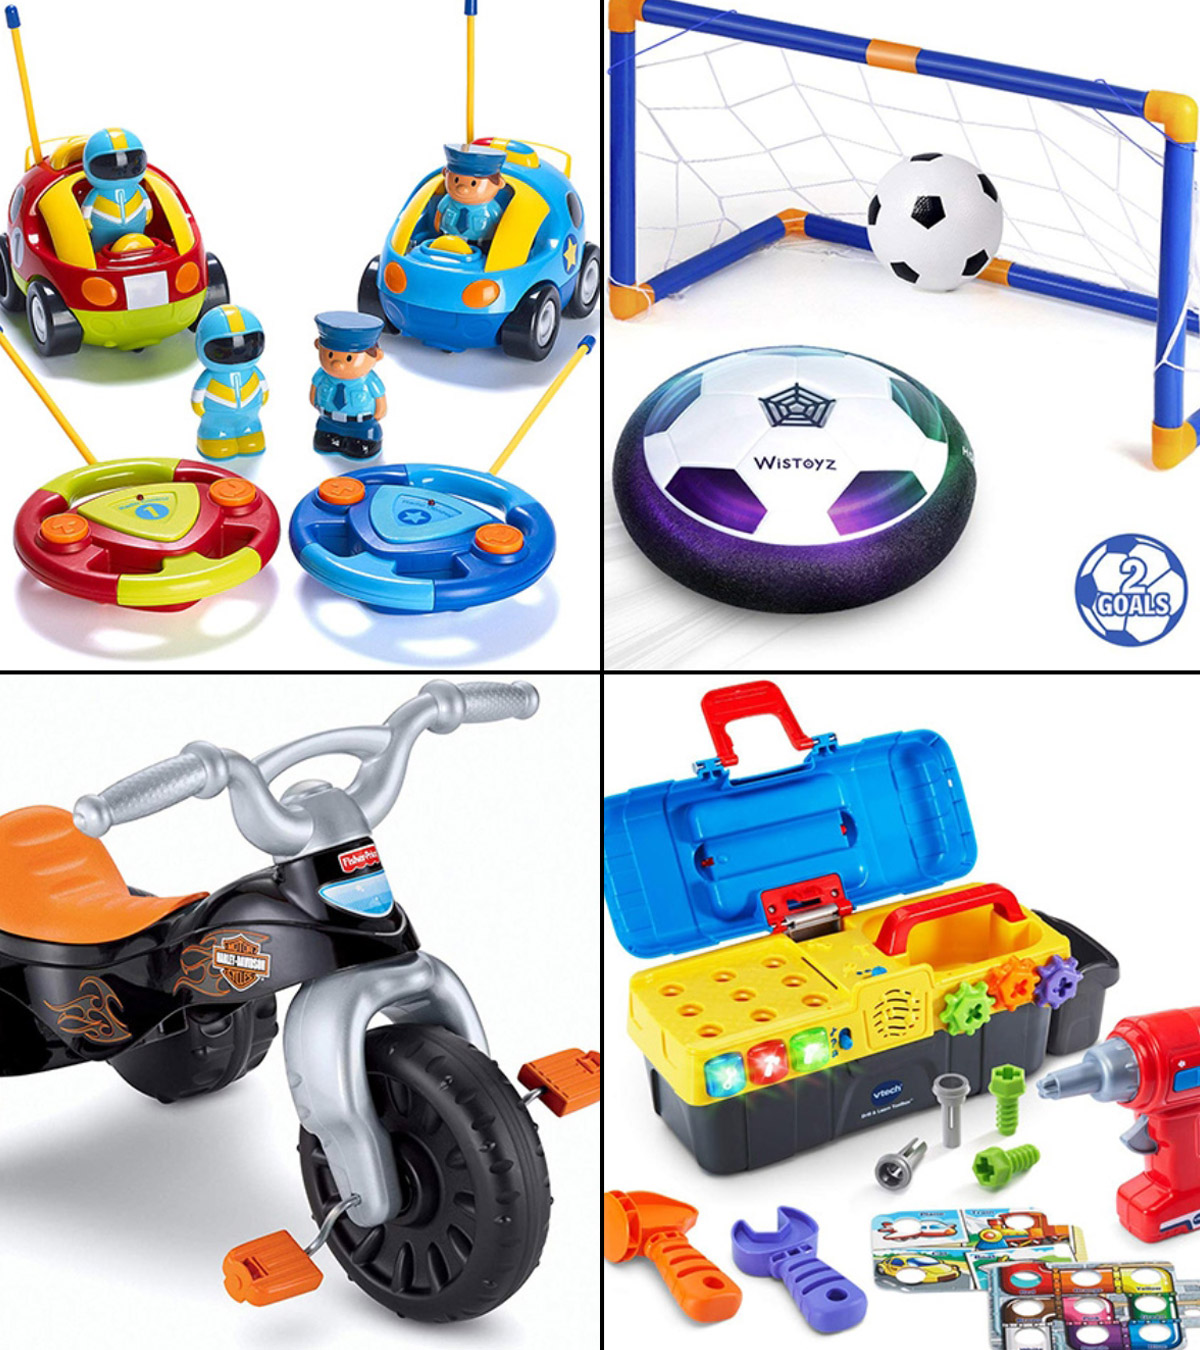 20 Best Toys For 3-Year-Old Boys To Stay Engaged In 2023